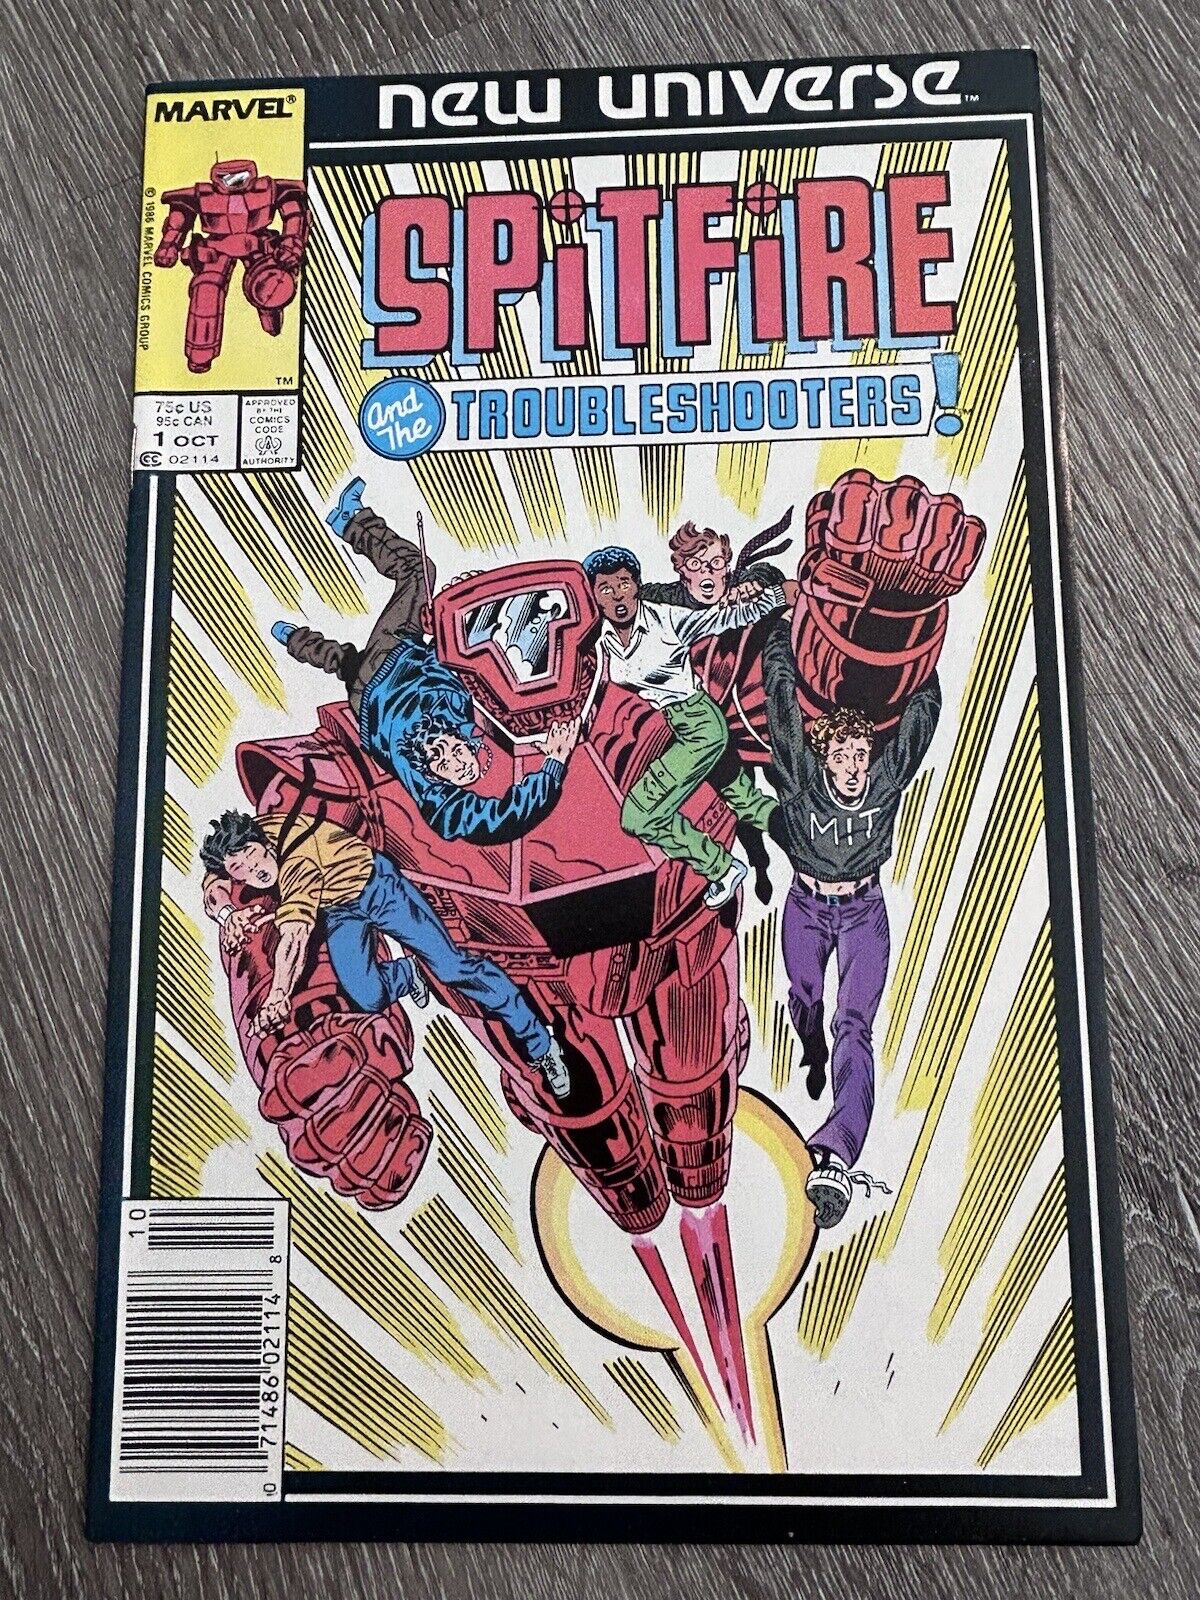 Spitfire and the Troubleshooters #1 Oct. 1986 Marvel Comics Newsstand NM